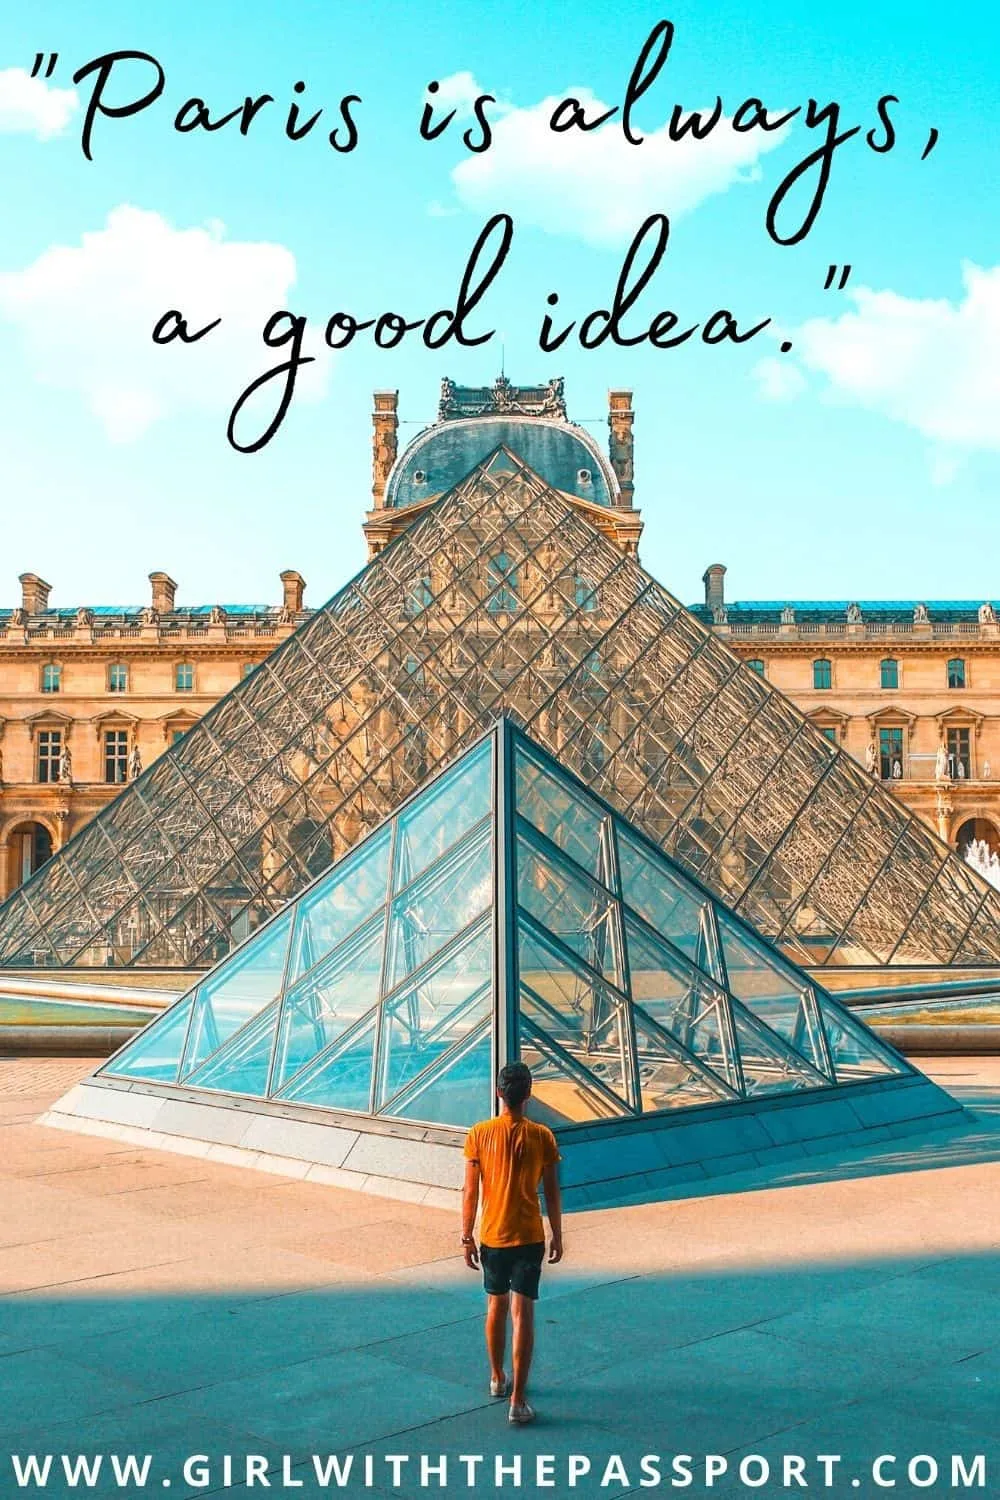 Quotes about Paris with a young boy standing in front of the glass pyramids of the Louvre.